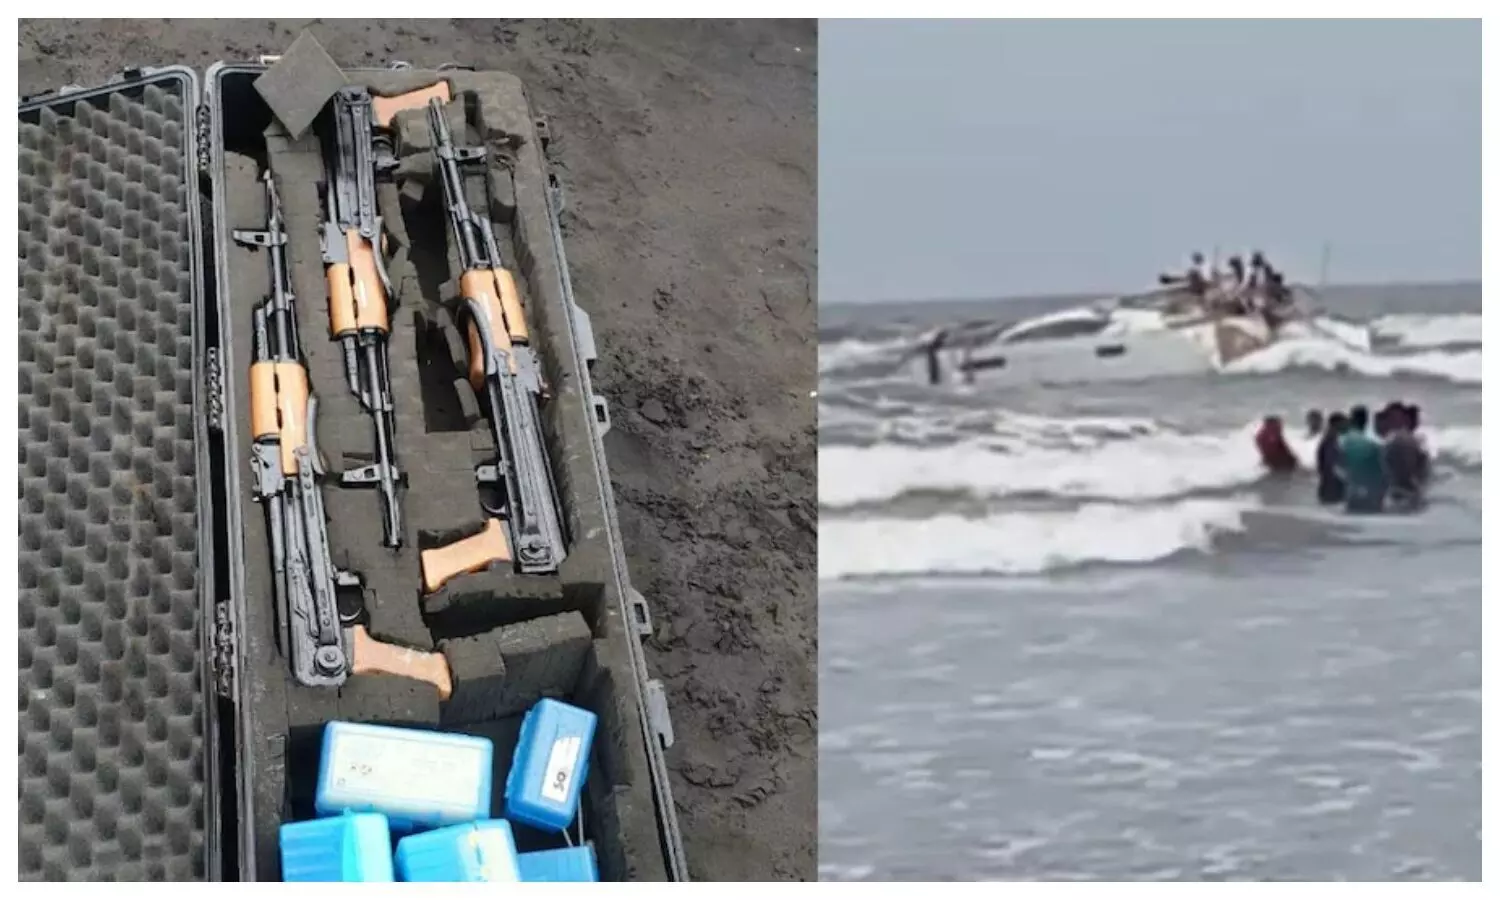 Two boats with AK 47 recovered in Raigad near Mumbai